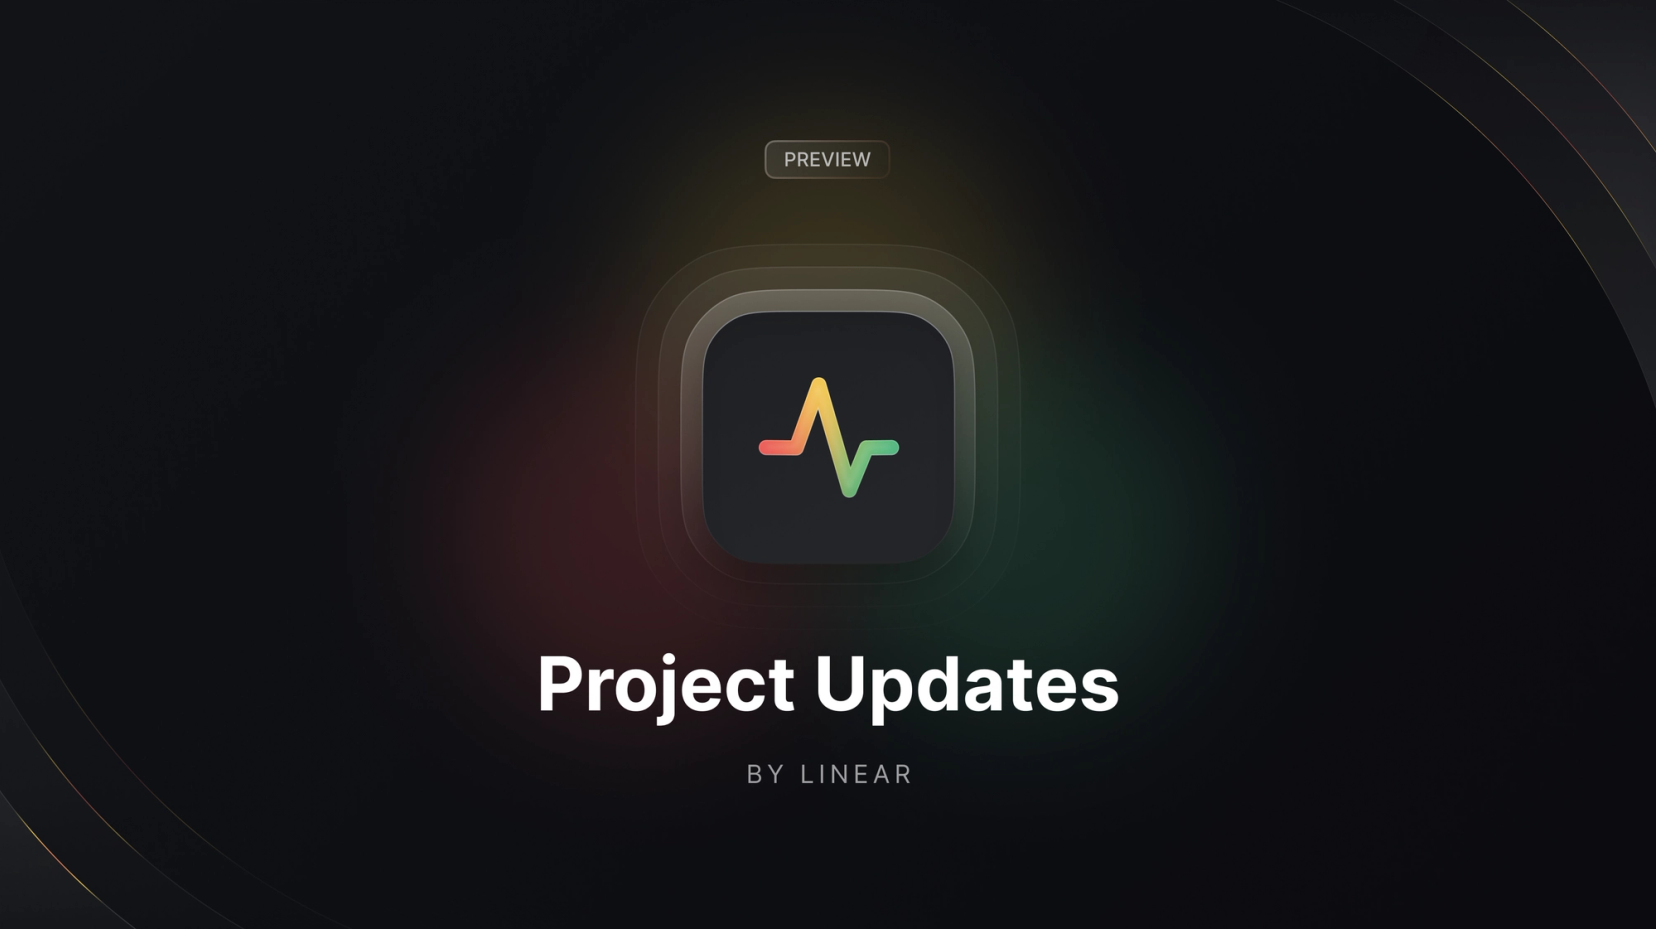 Project updates promotional image with activity icon